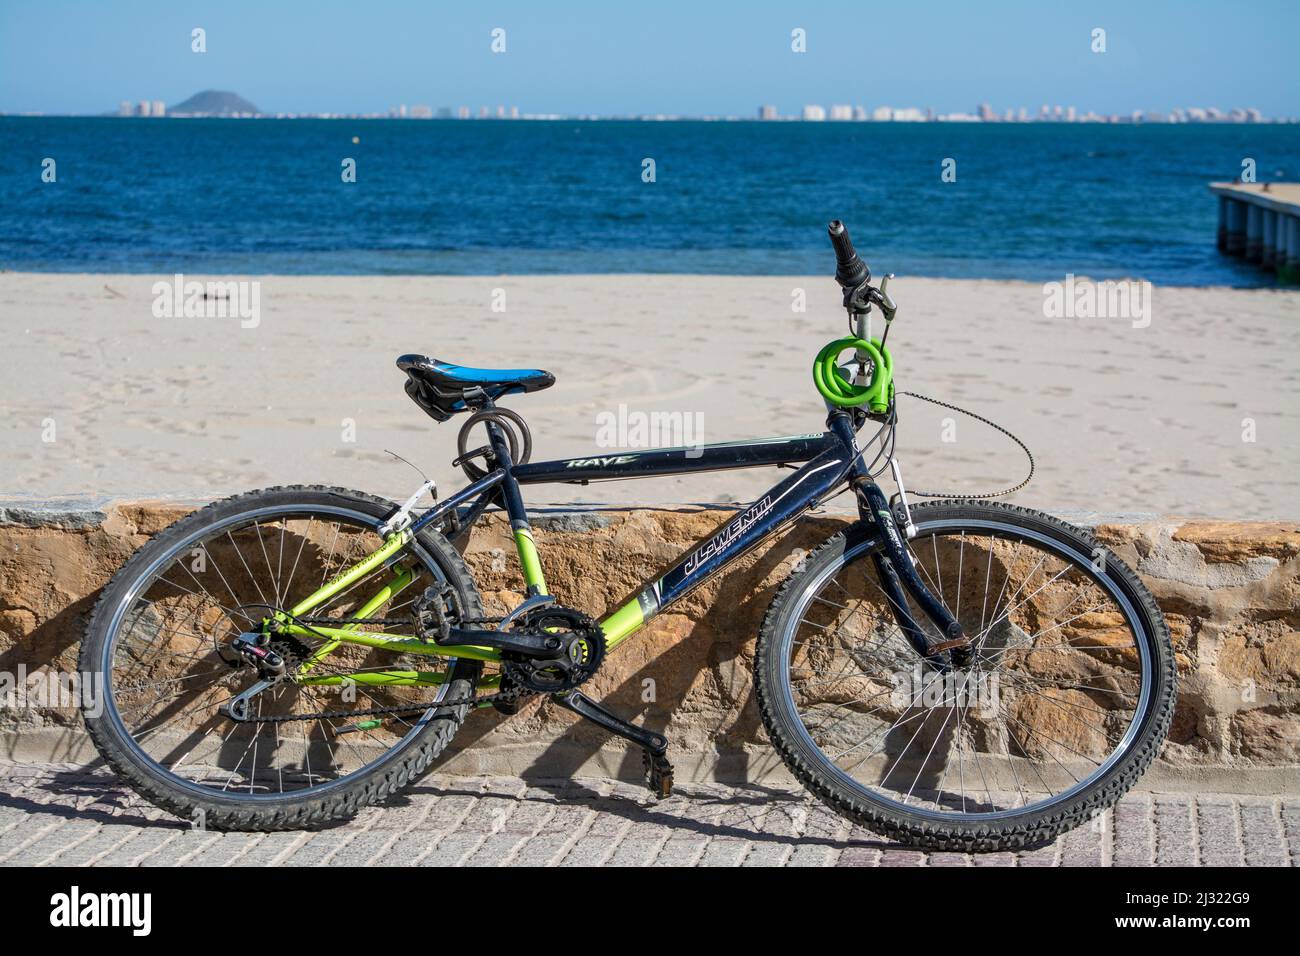 Bicycle leaning on the promenade wall on the Mar Menor, Murcia, Spain Stock Photo